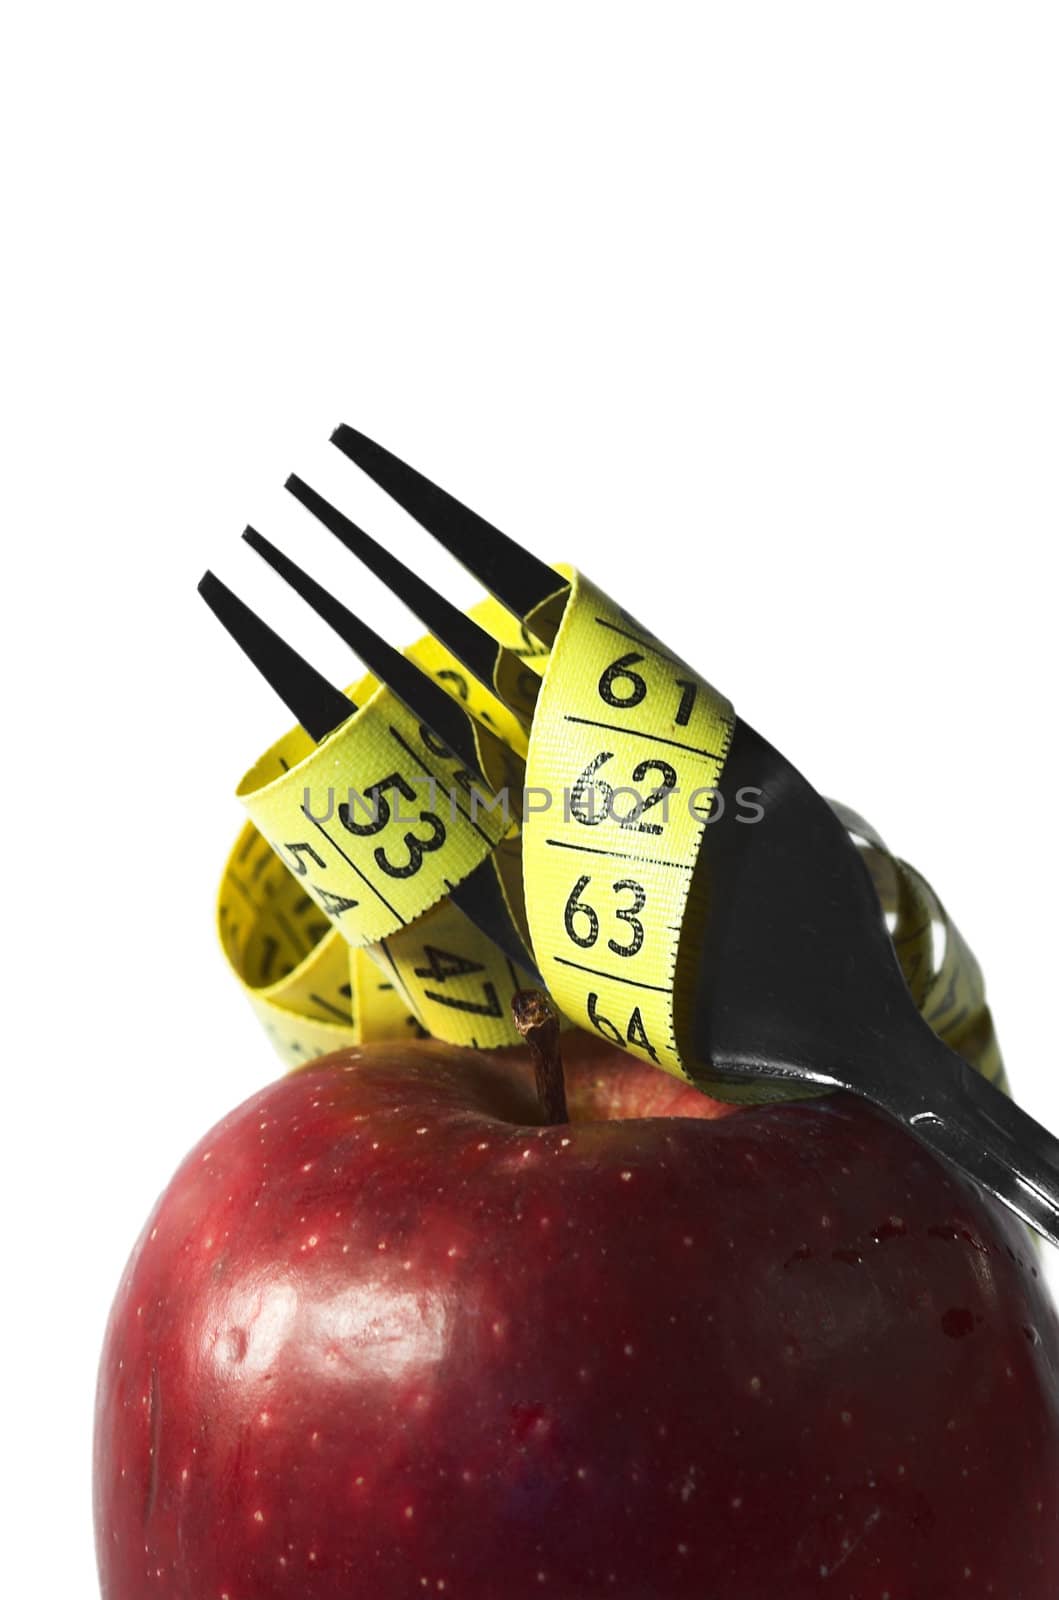 apple, autumn, centimeter, centimetre, crutch, cutlery, diet, drew, drop, eat, fall, fork, fruit, loose, measure, prong, red, vitamin, water, weight, yellow, 